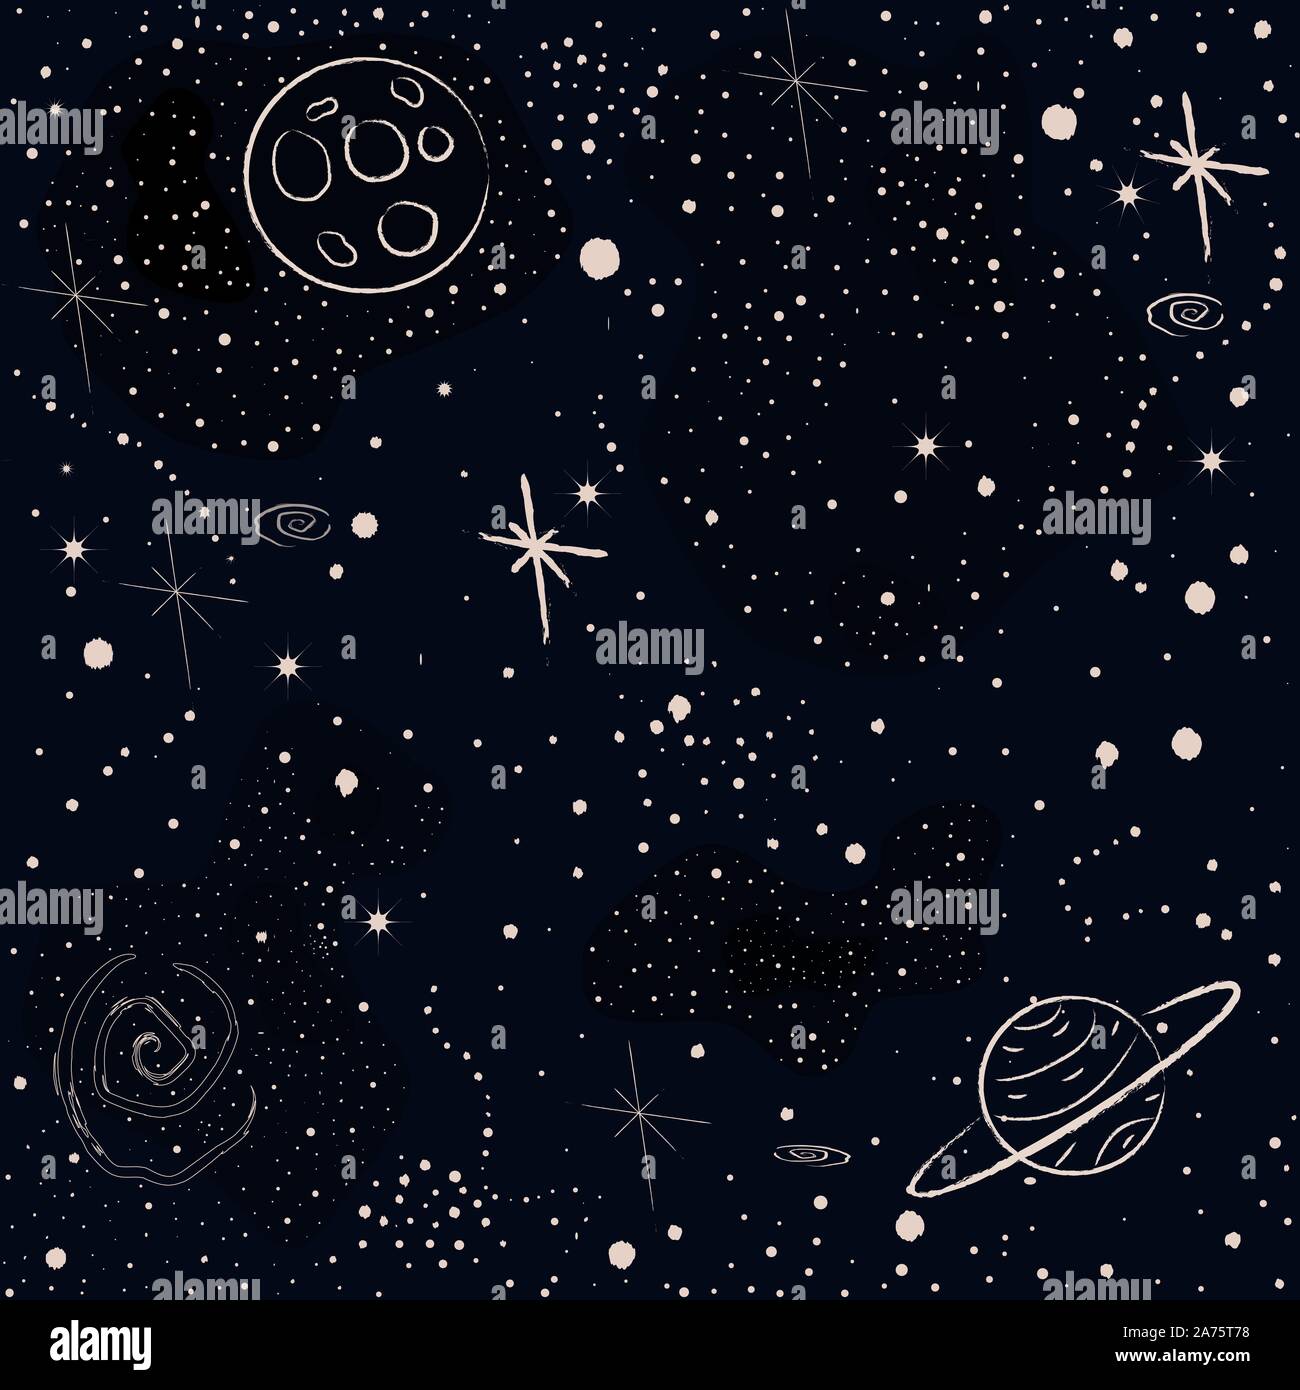 Seamless Cosmic Pattern with stars, planets,  rocket, spiral galaxies and constellations. Hand Drawn with Brush. Vector Illustration Stock Vector